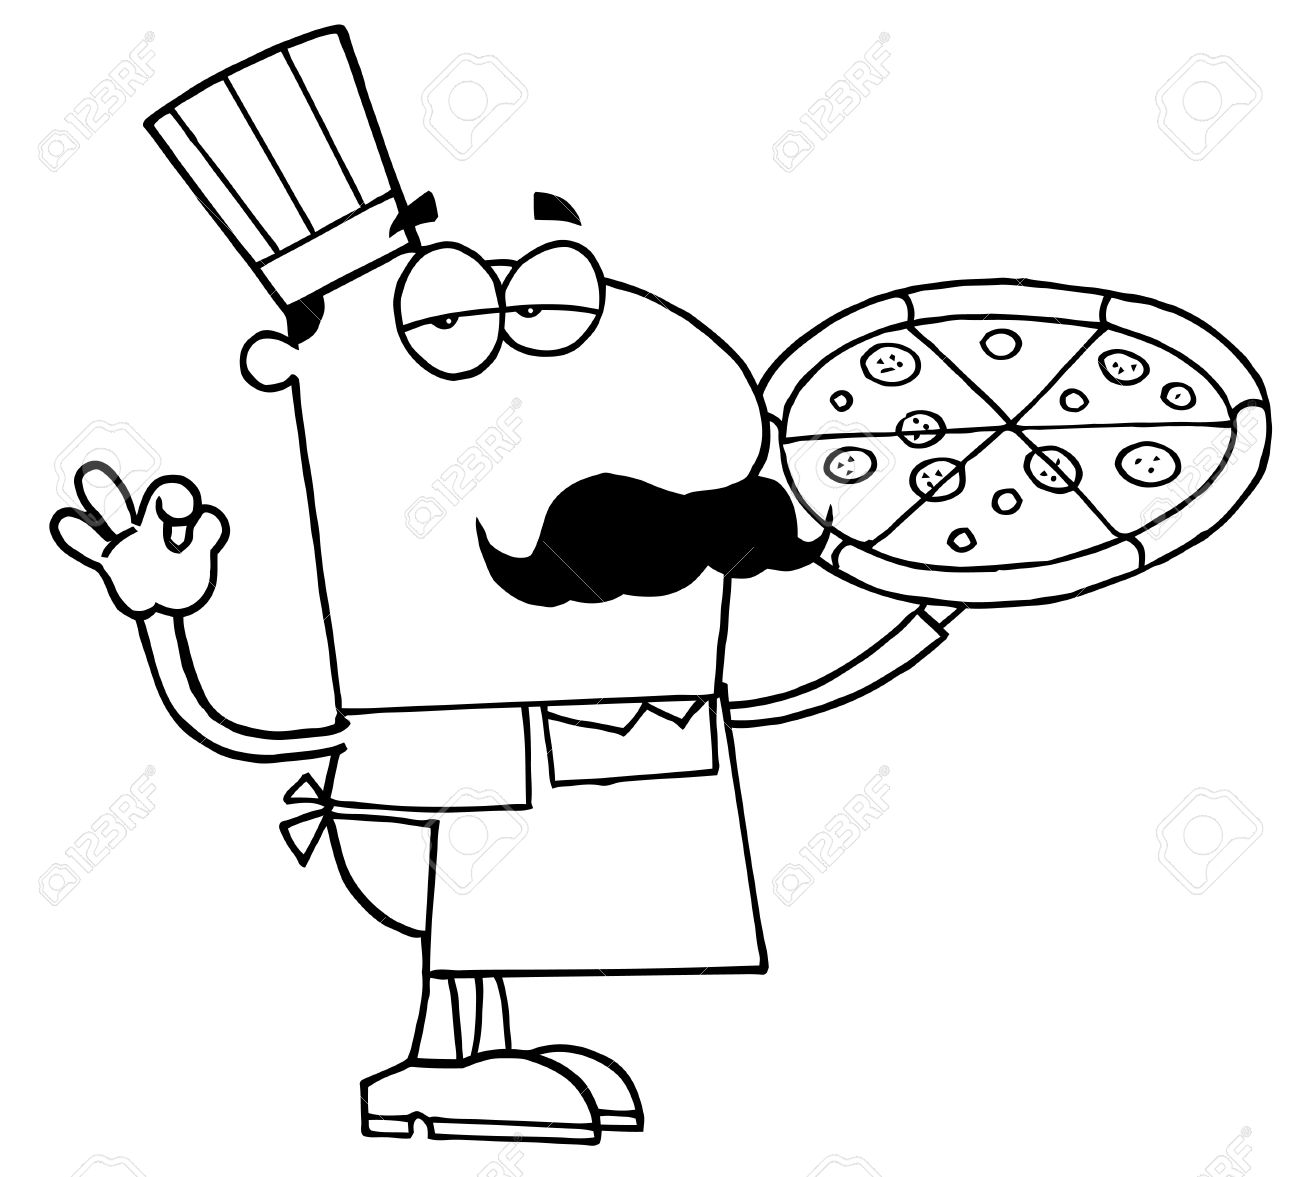 pizza clipart black and white free - photo #25